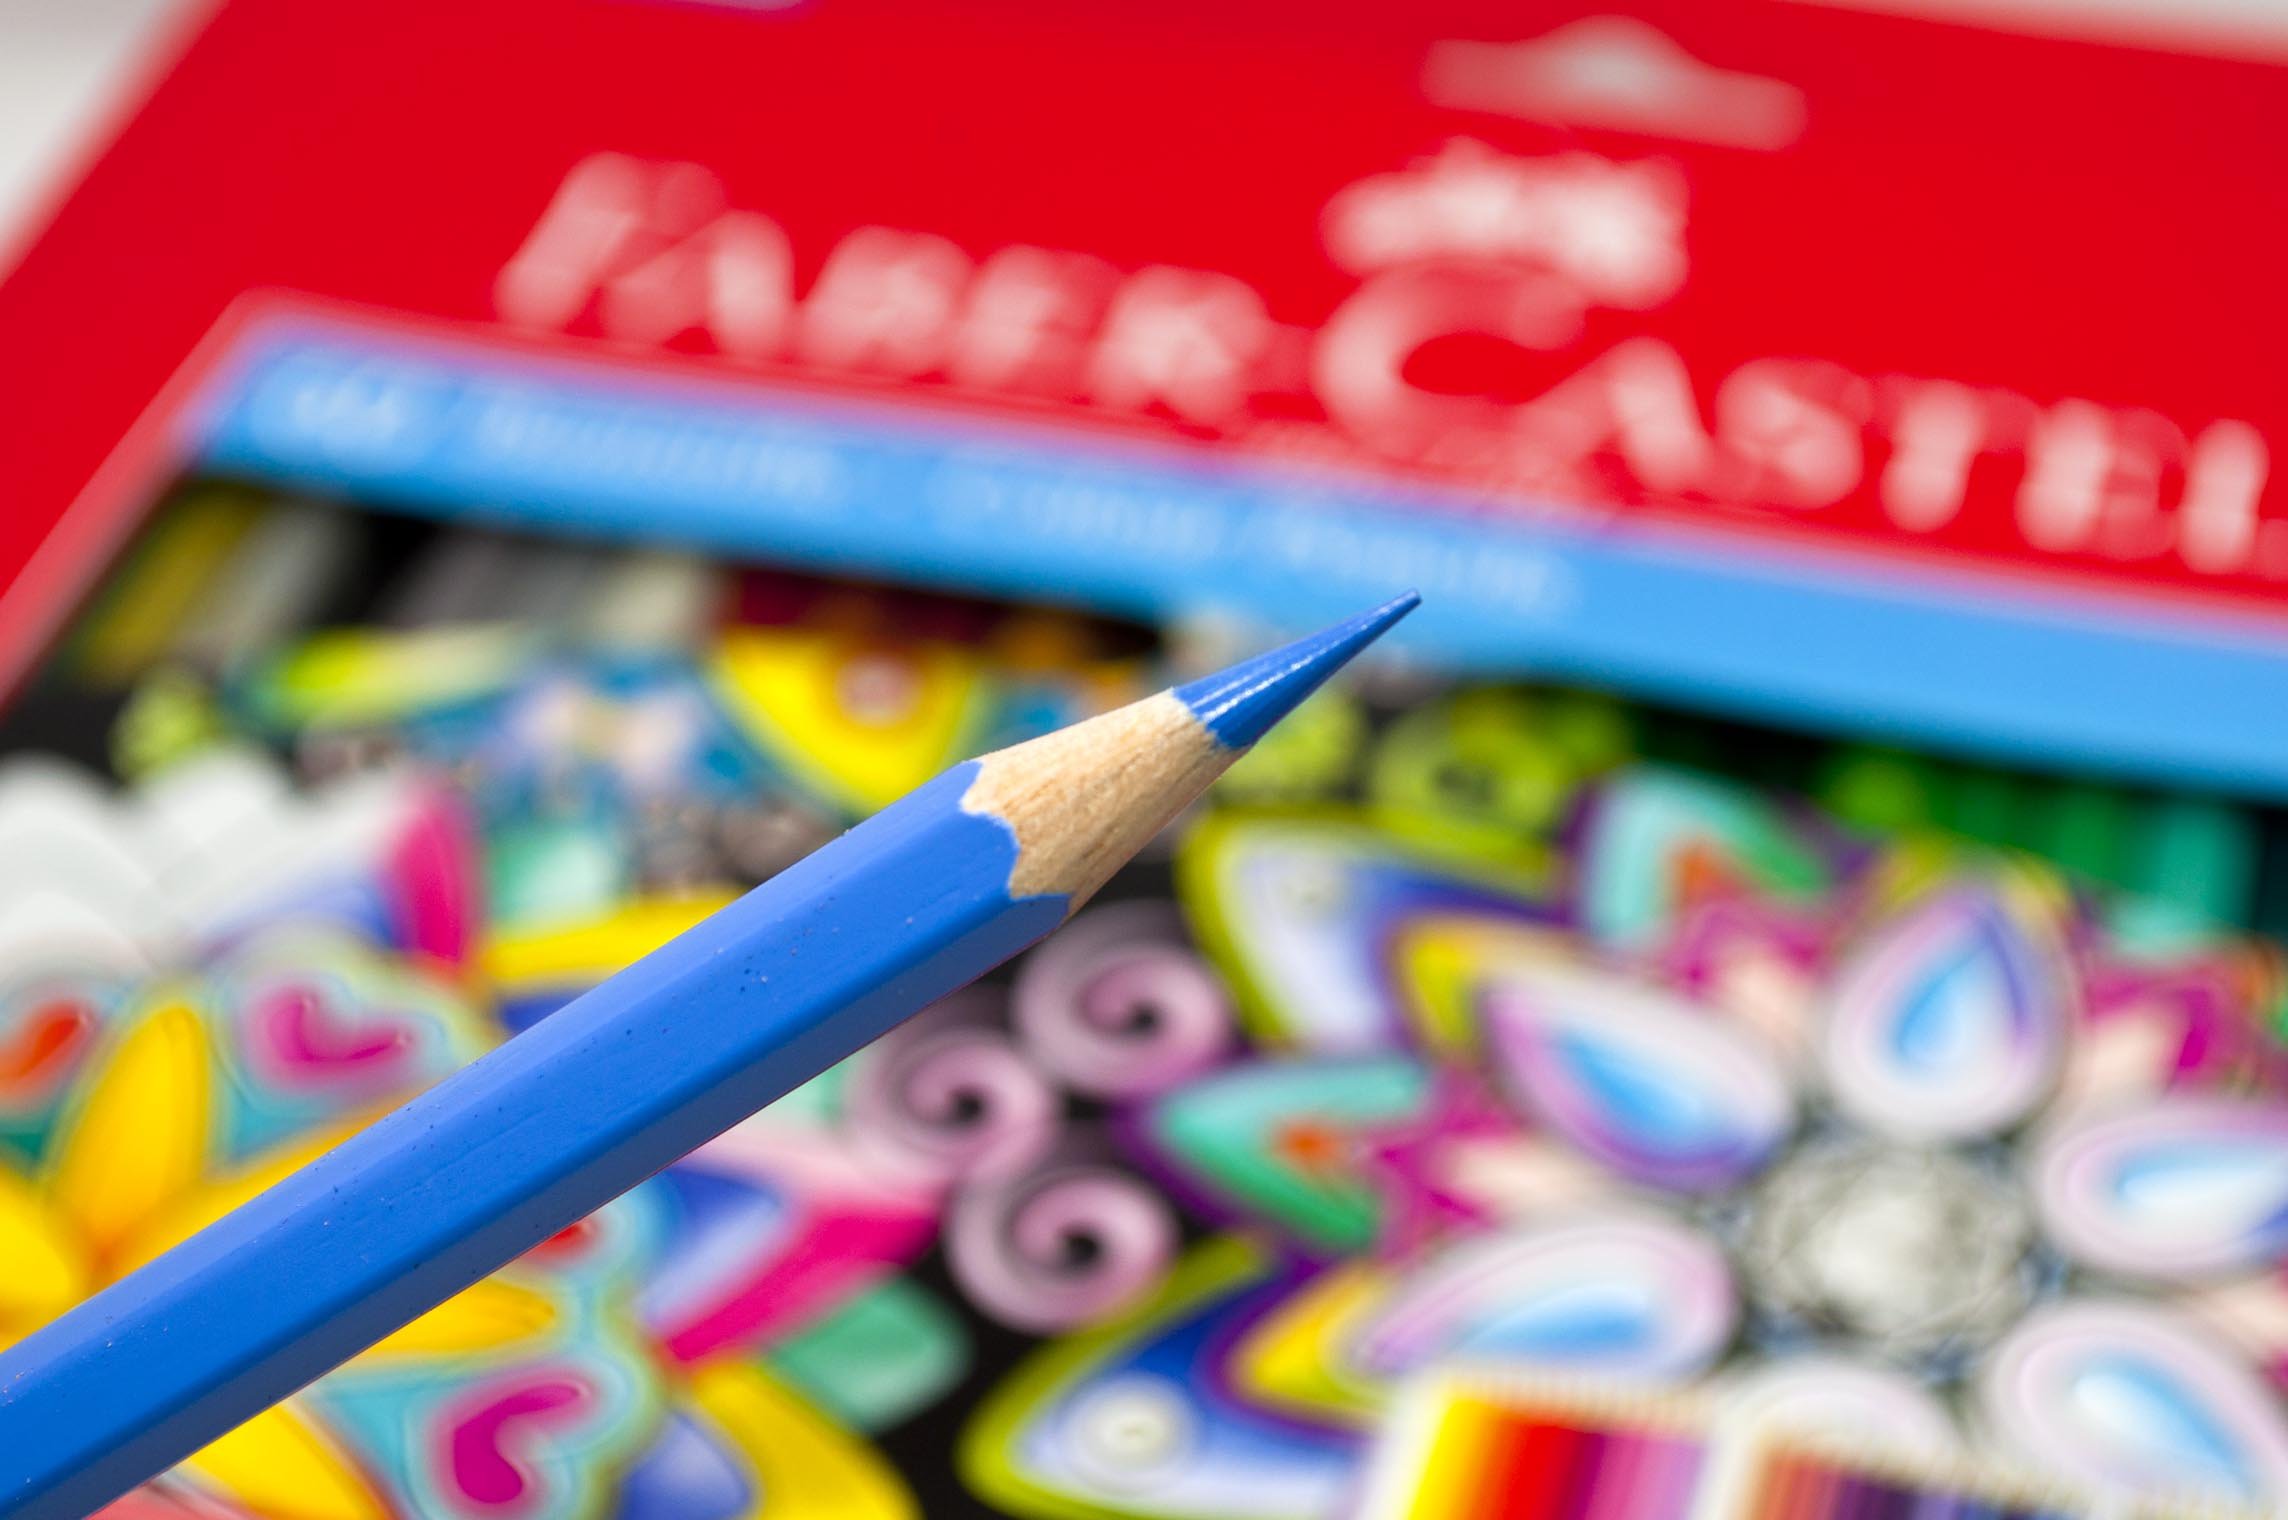 The Best Colored Pencil Sets for Beginners –